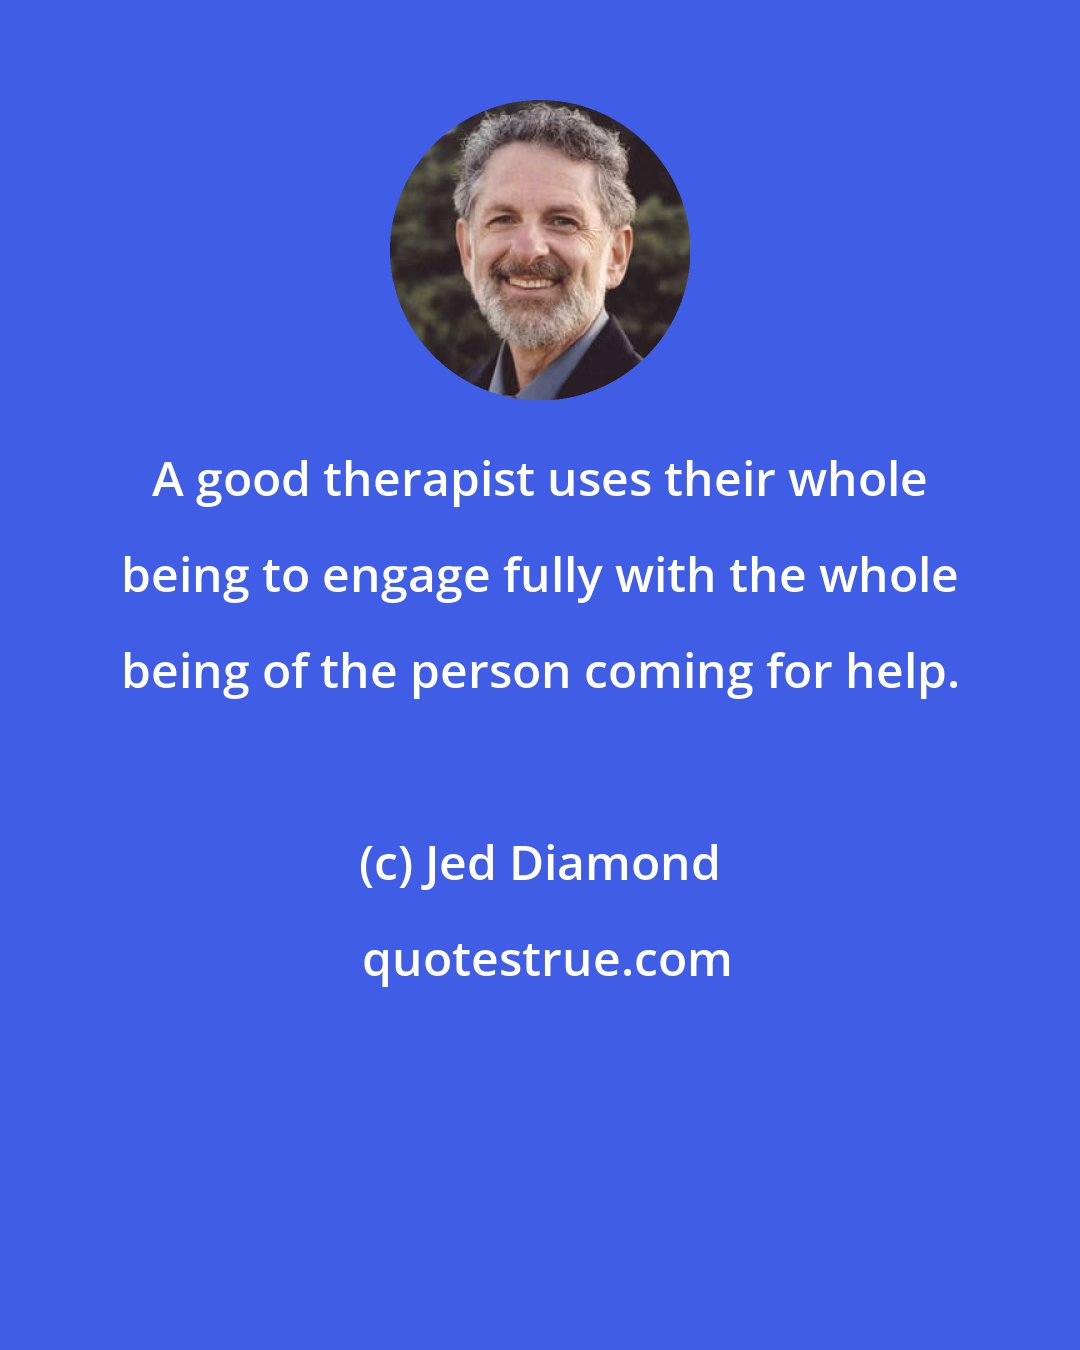 Jed Diamond: A good therapist uses their whole being to engage fully with the whole being of the person coming for help.